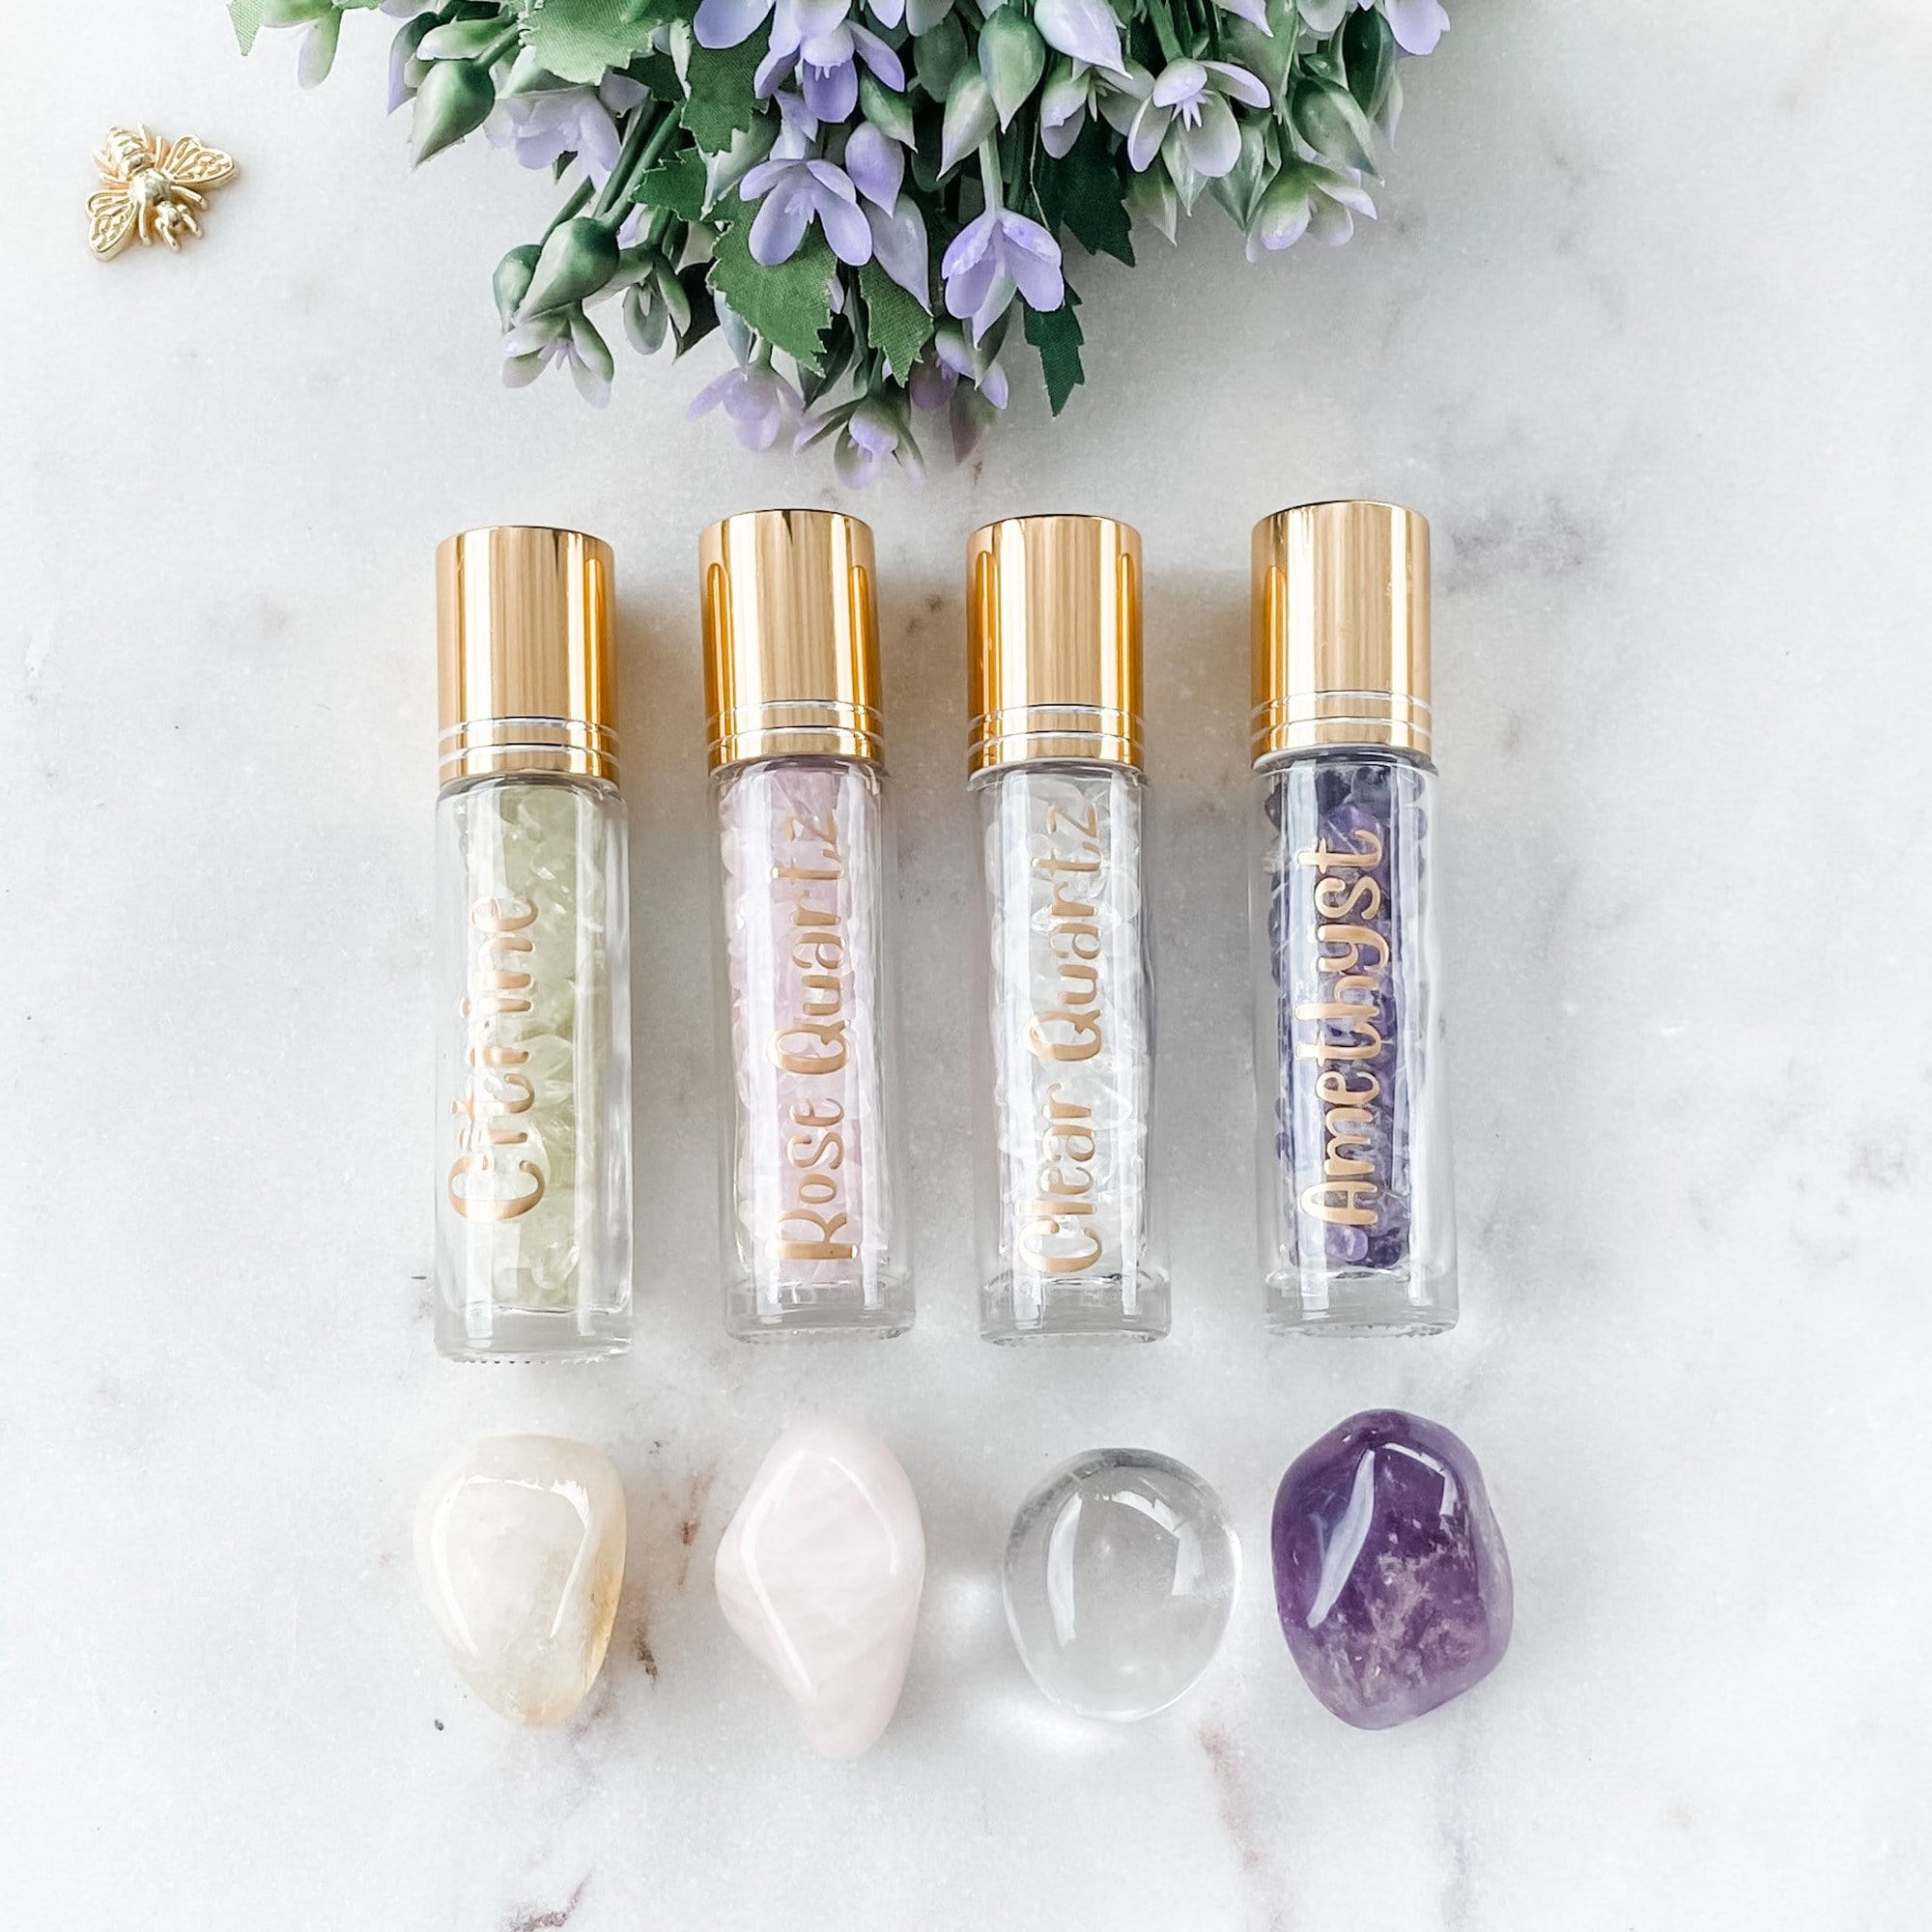 s1011 Crystal chip roller essence aromatherapy tumbled stone set crystals australia gemrox 1